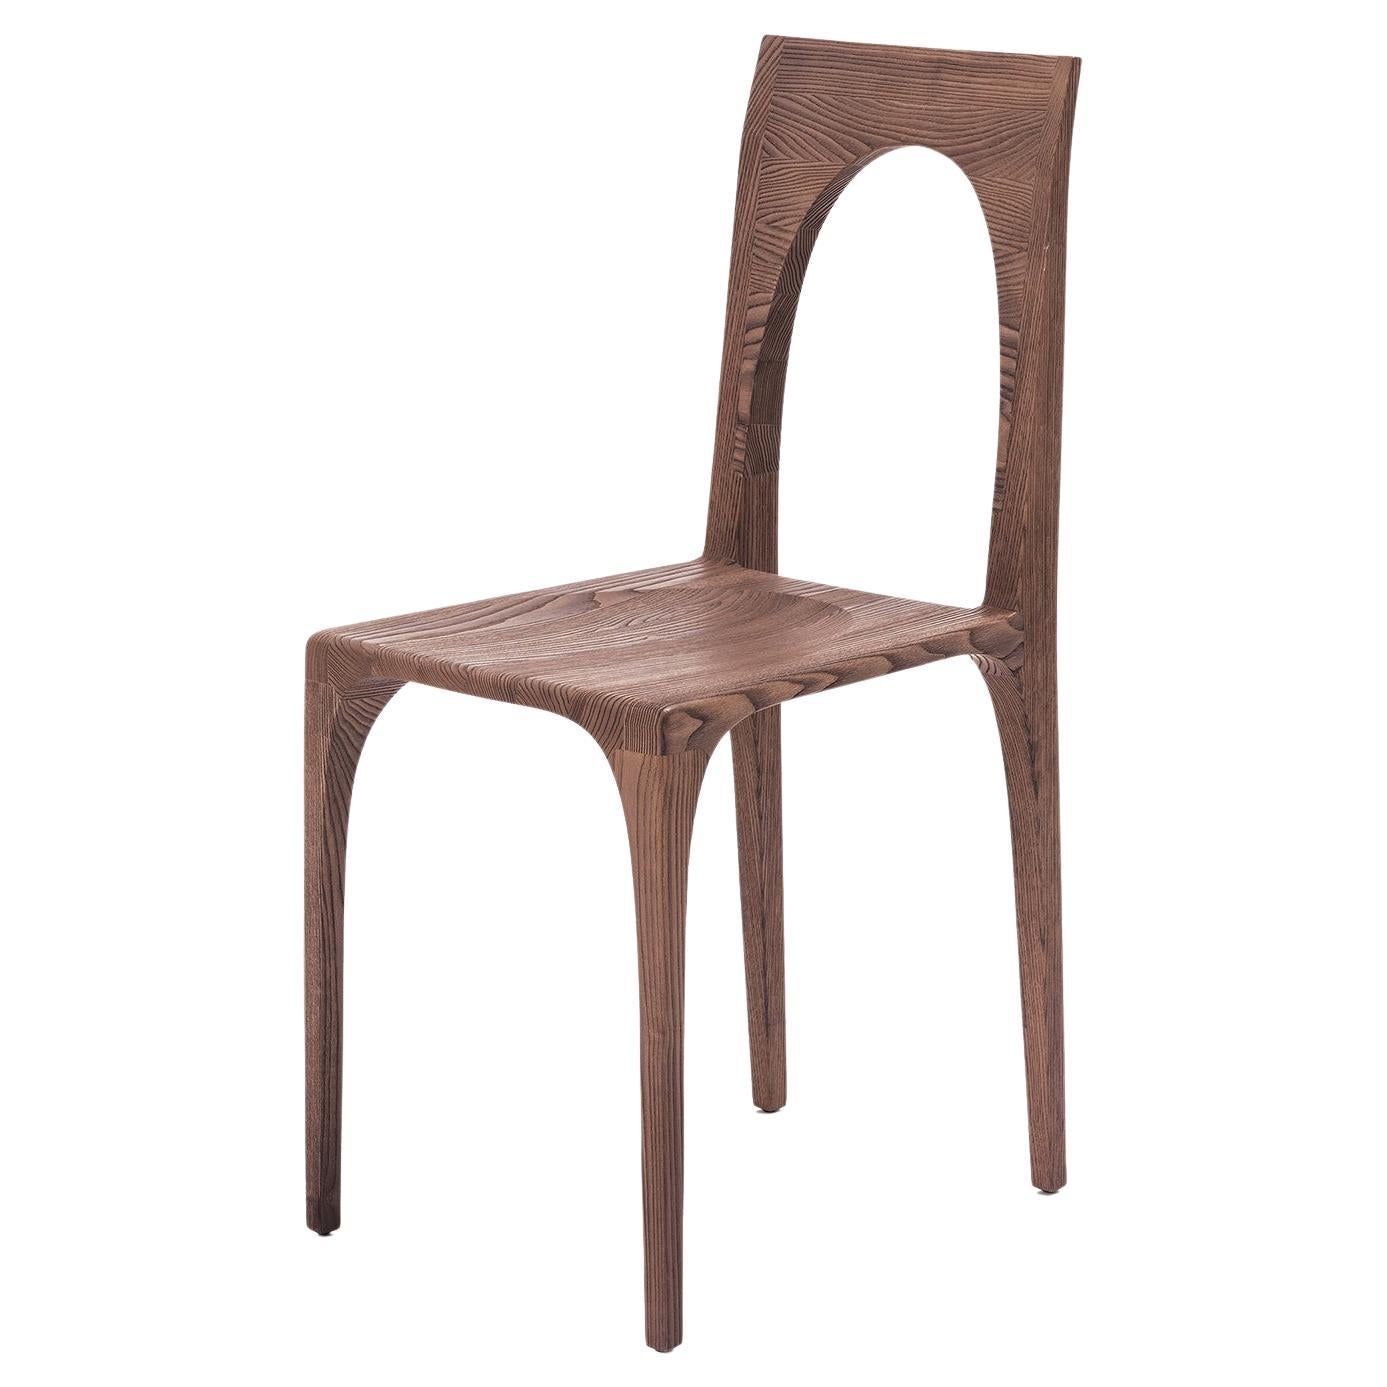 Plum Dining Chair For Sale